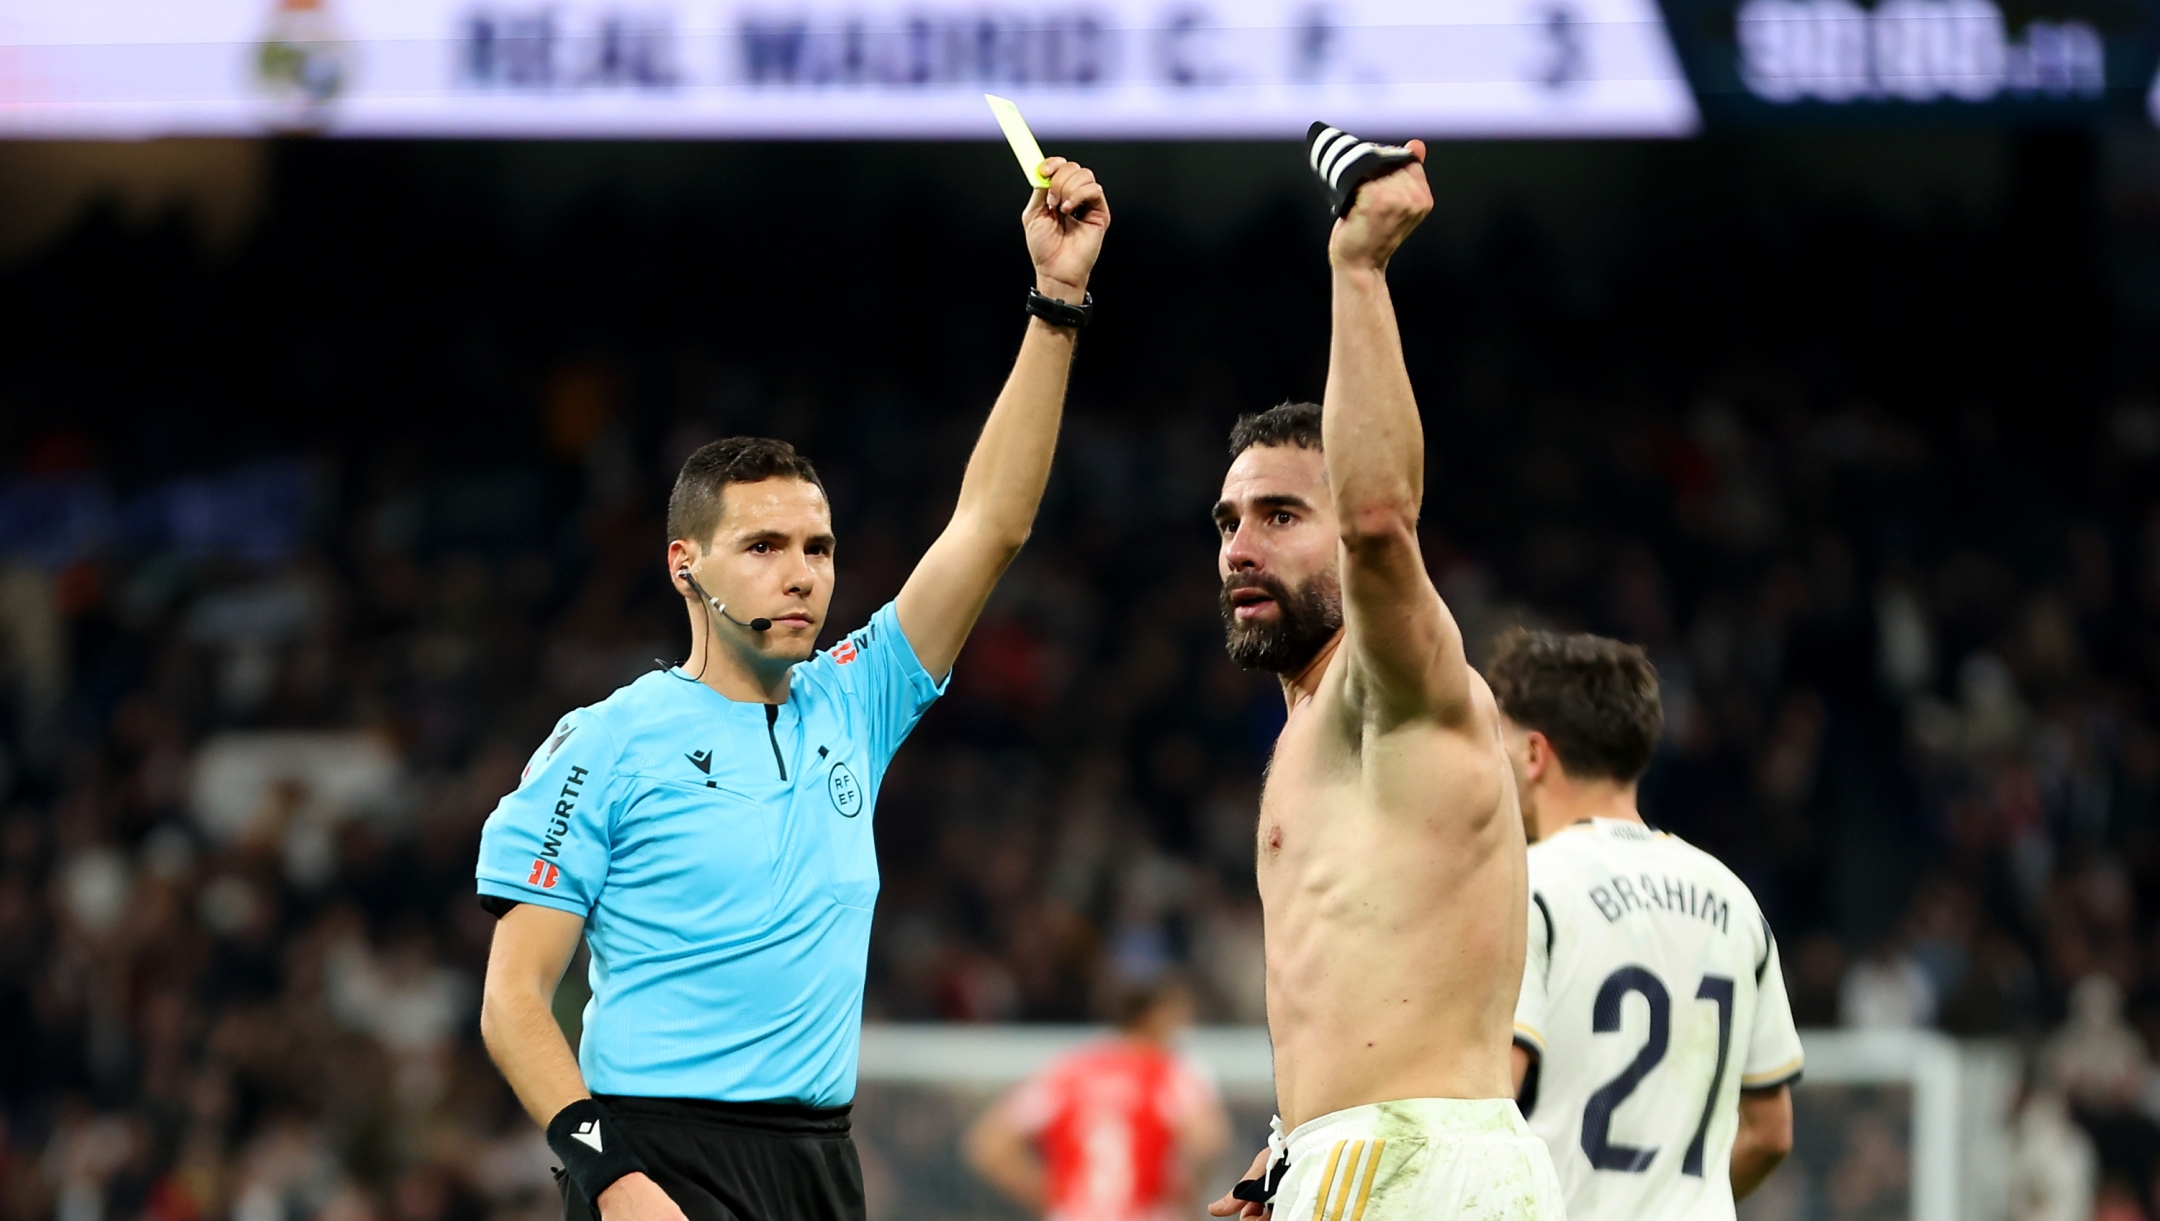 MADRID, SPAIN - JANUARY 21: Referee Francisco José Hernández Maeso gives Daniel Carvajal of Real Madrid a yellow card for his celebration after scoring the teams third goal during the LaLiga EA Sports match between Real Madrid CF and UD Almeria at Estadio Santiago Bernabeu on January 21, 2024 in Madrid, Spain. (Photo by Florencia Tan Jun/Getty Images)